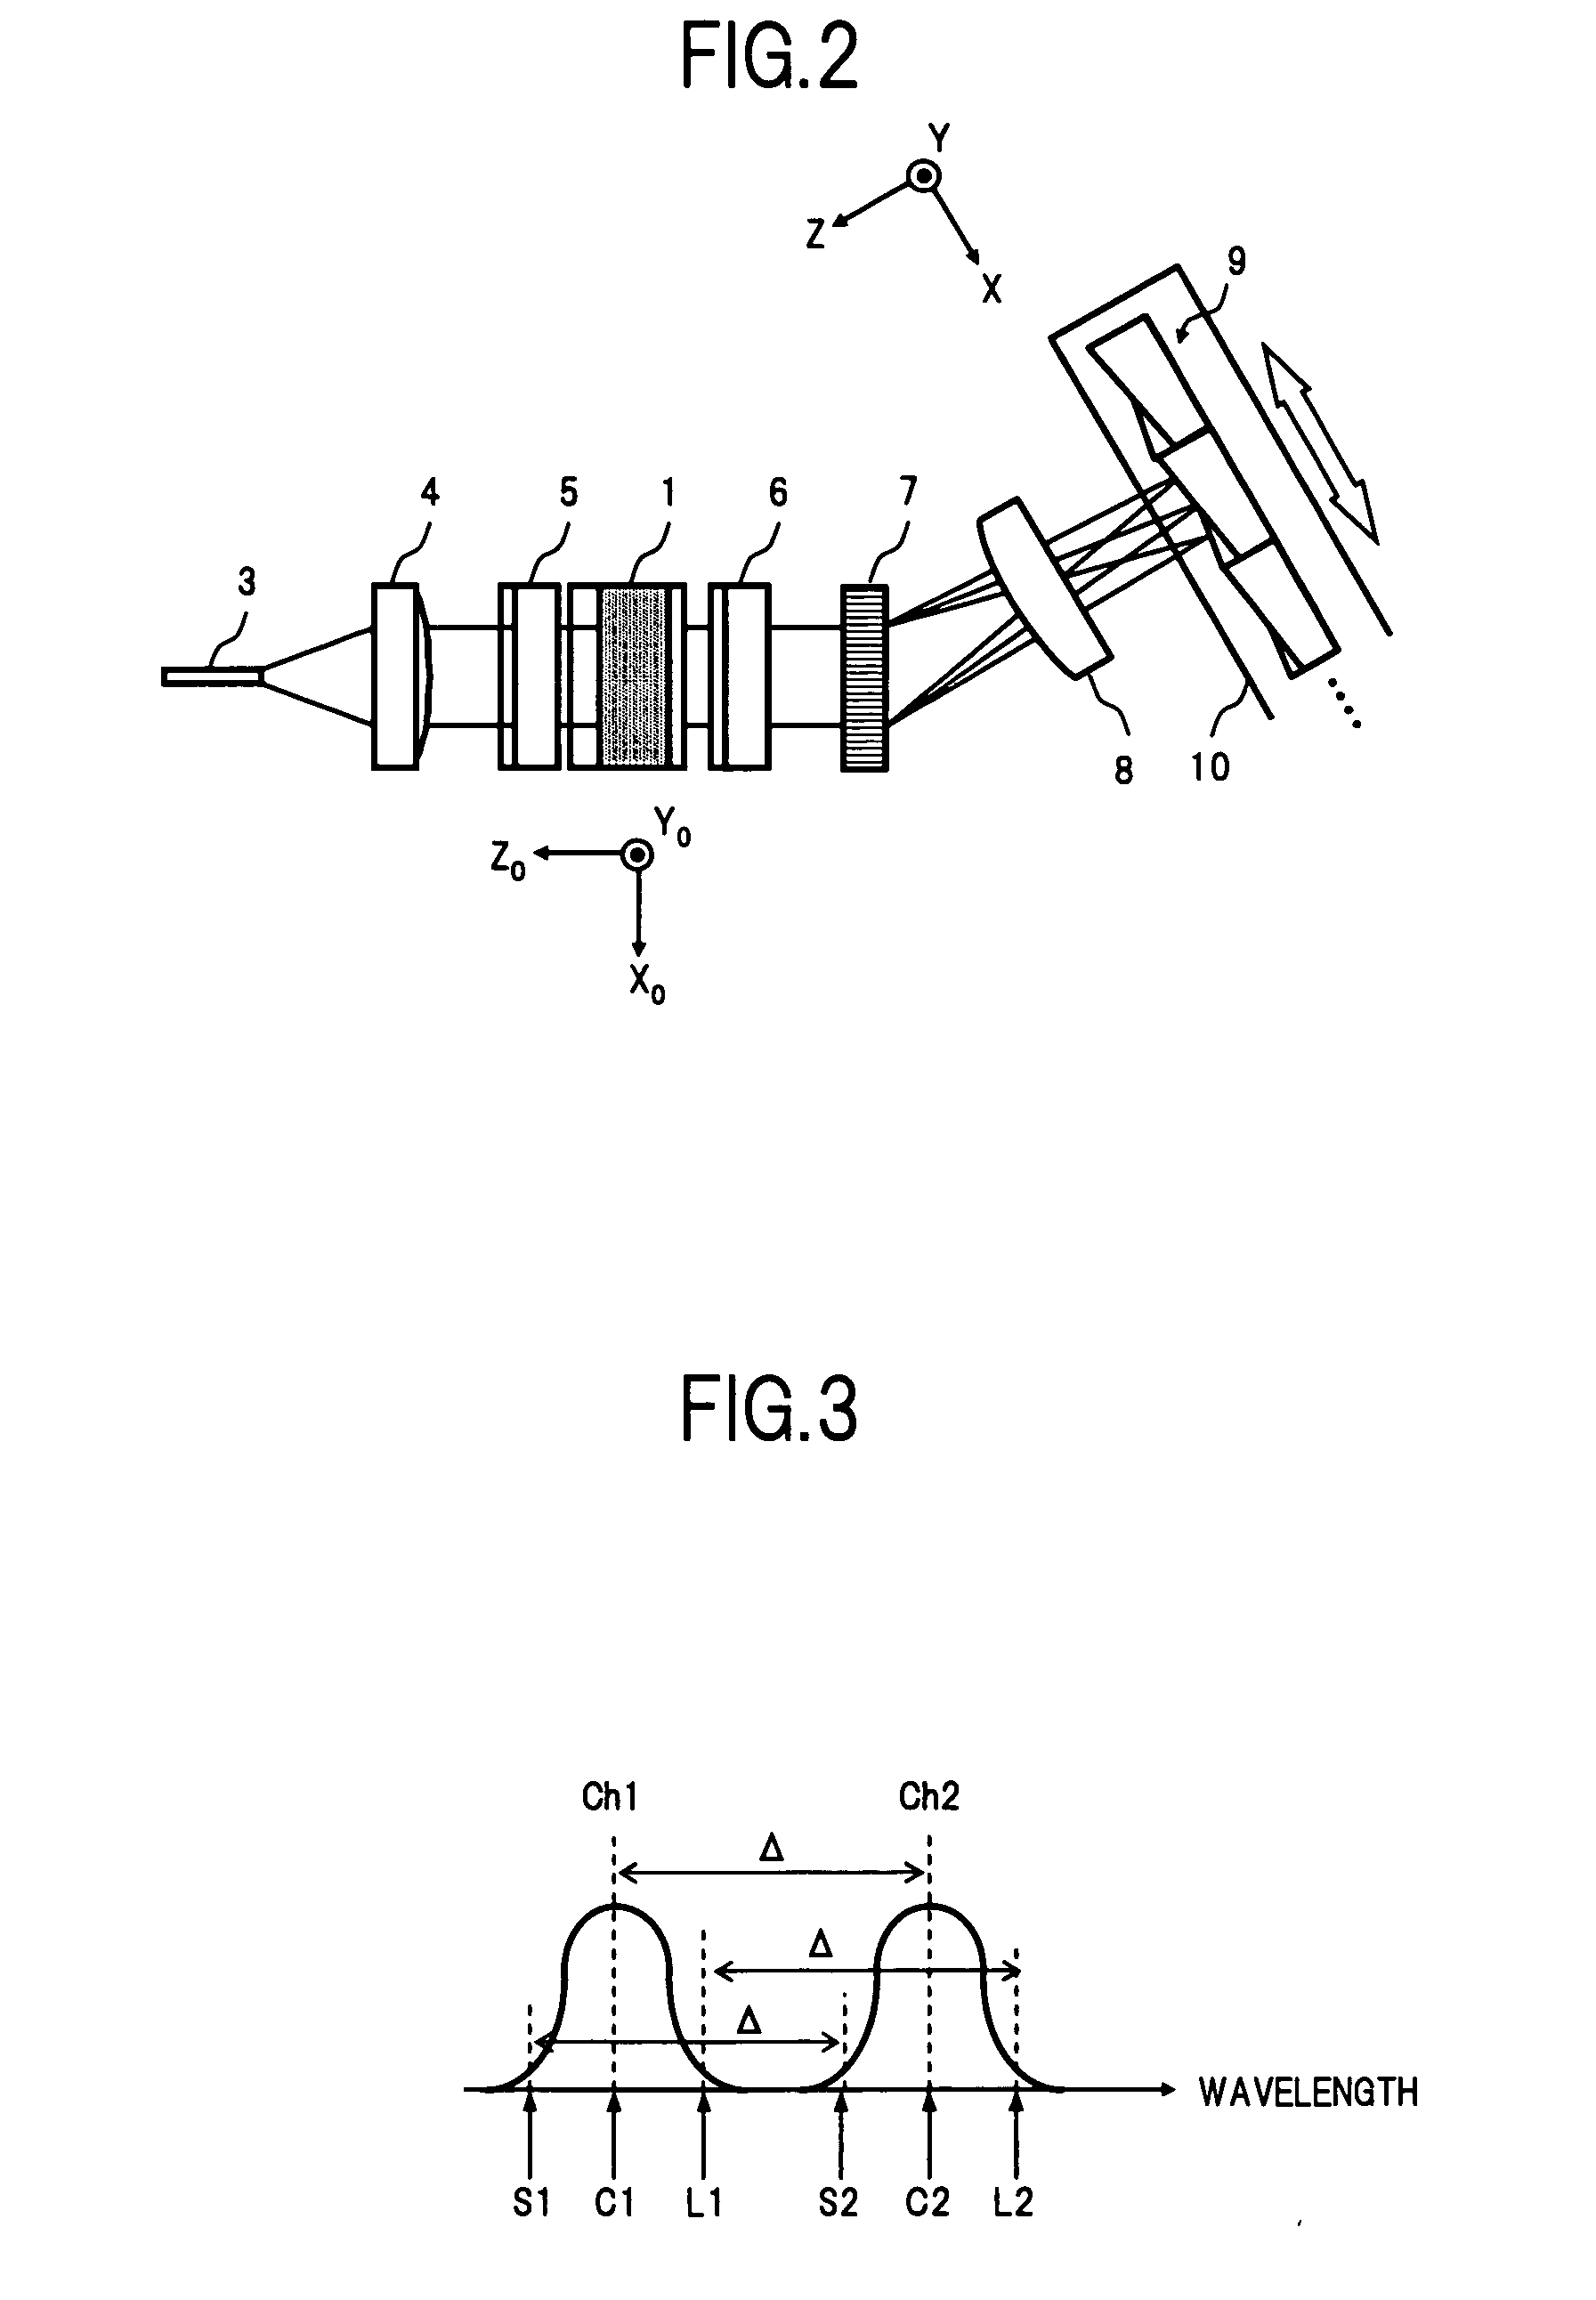 Chromatic dispersion and dispersion slope compensating apparatus